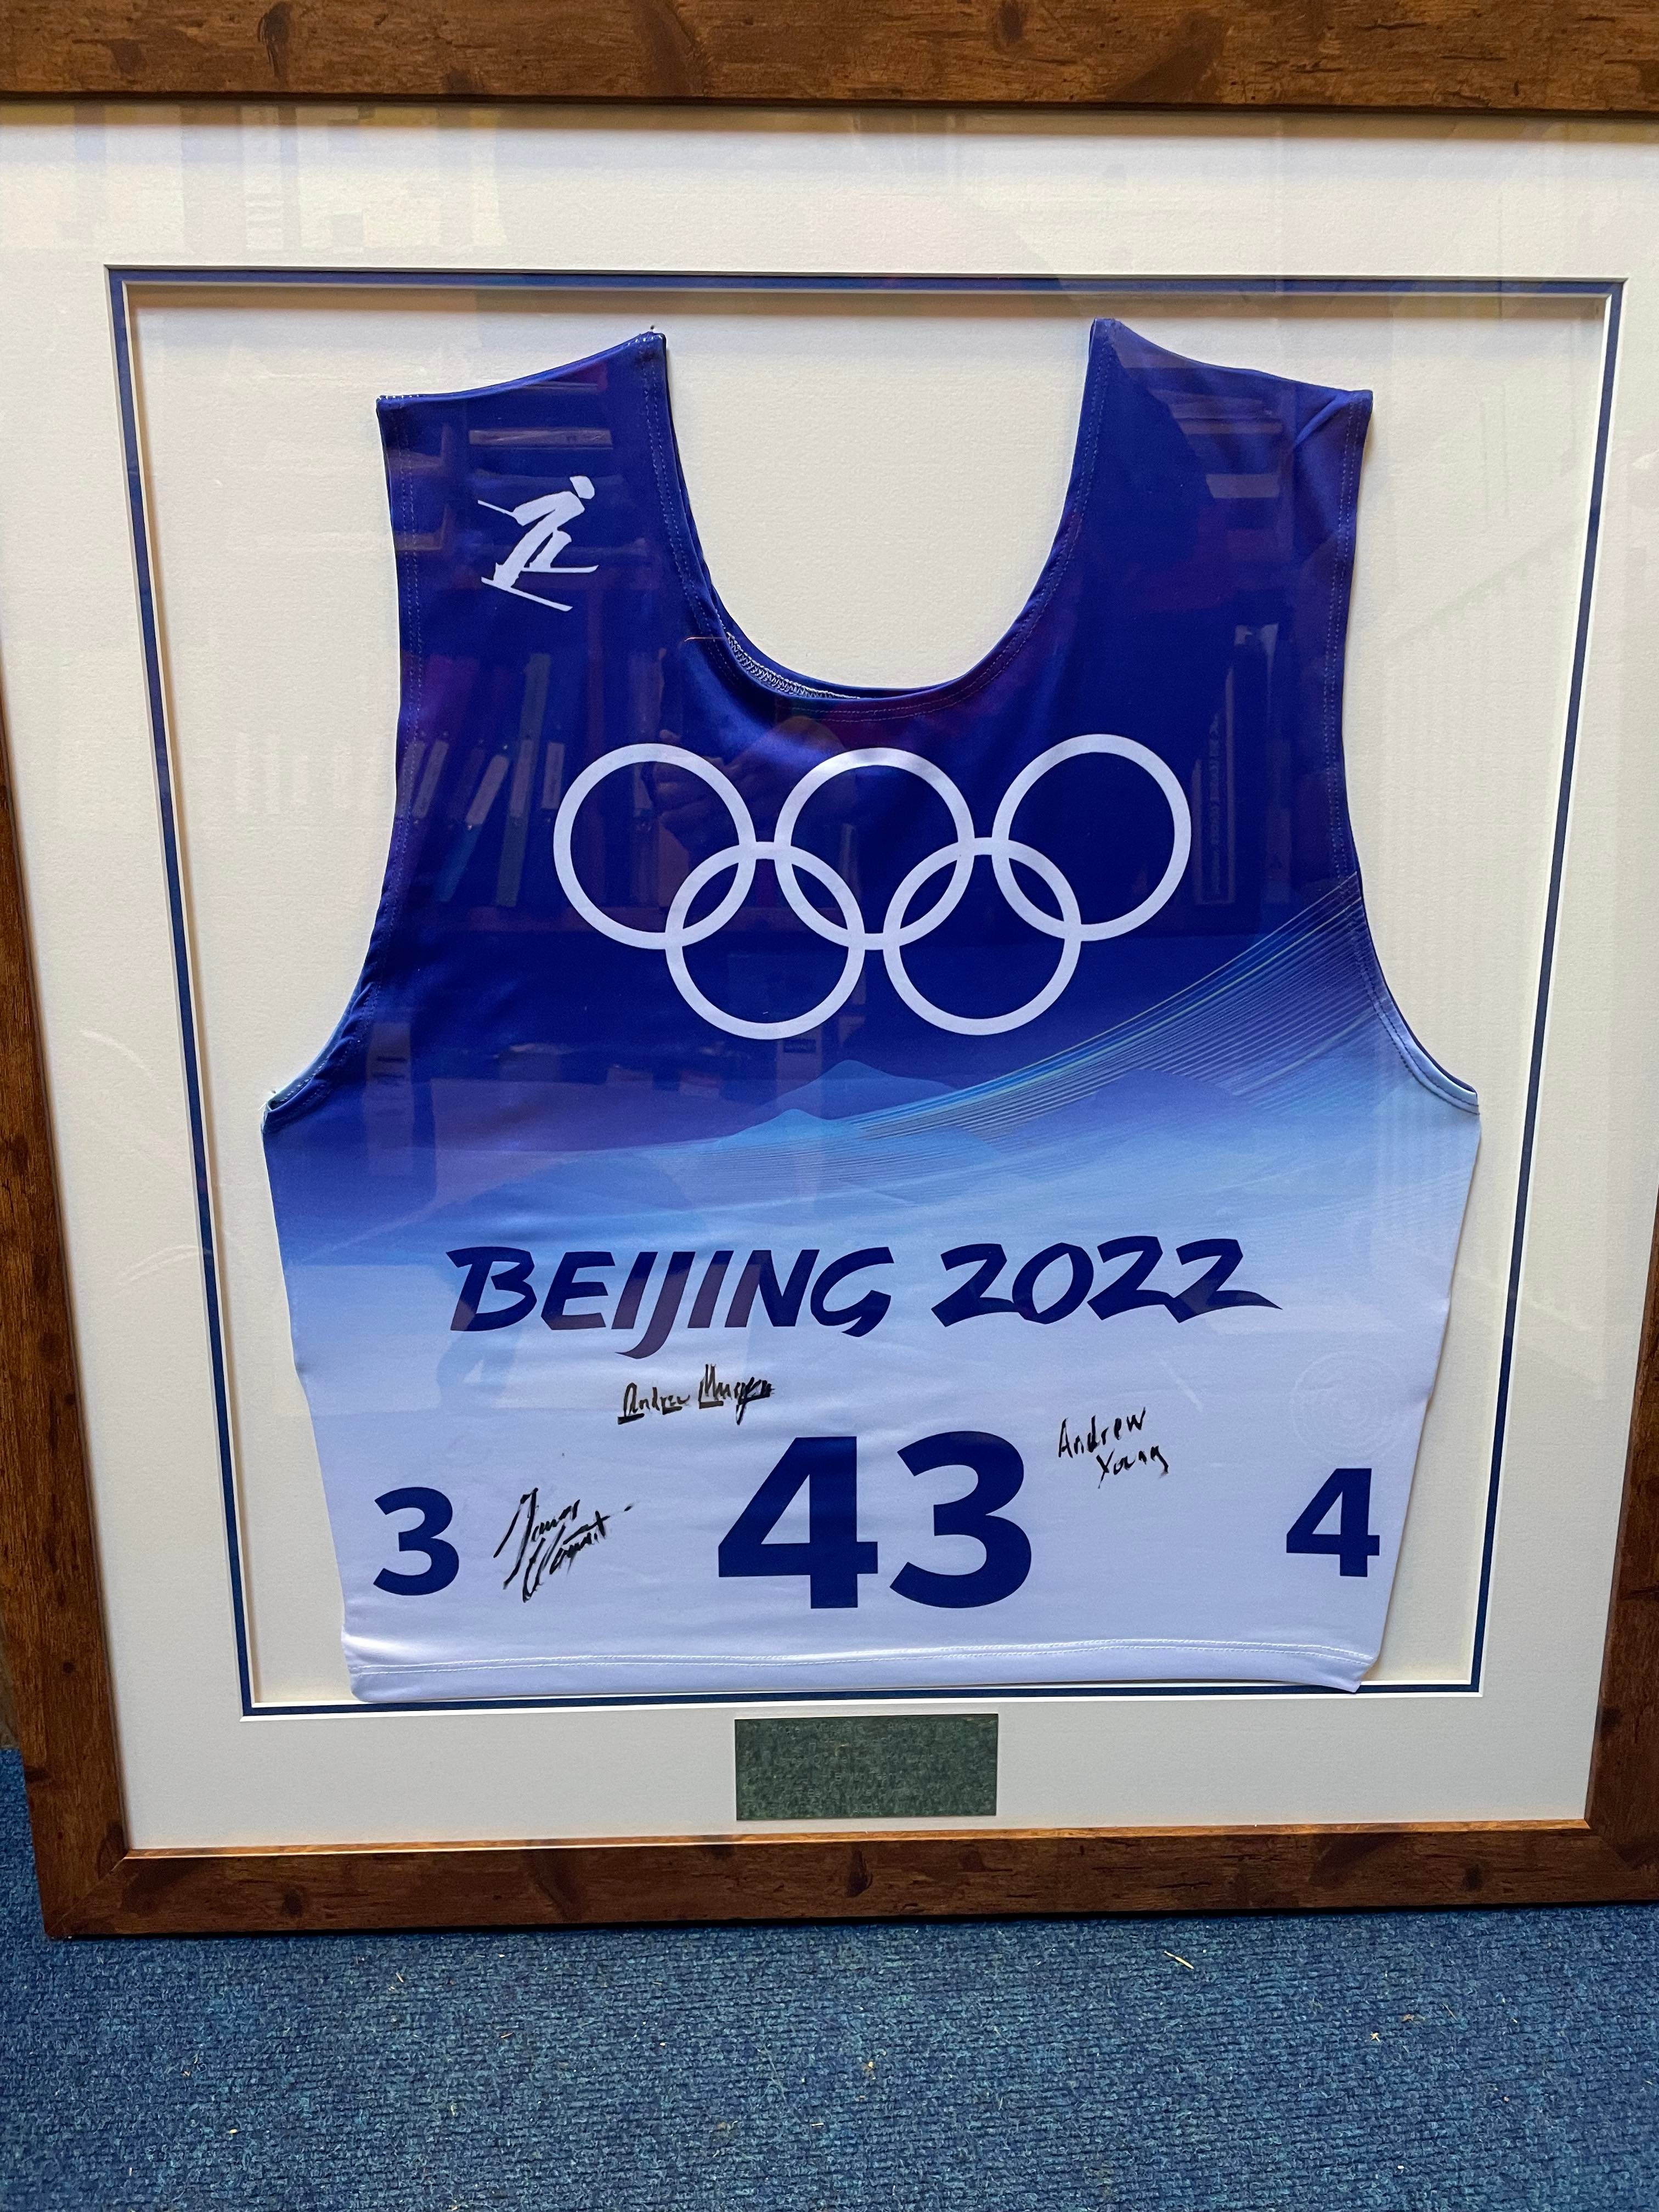 Beijing Winter Olympics 2022 vest signed by Andrew Musgrave, Andrew Young and James Clugnet.